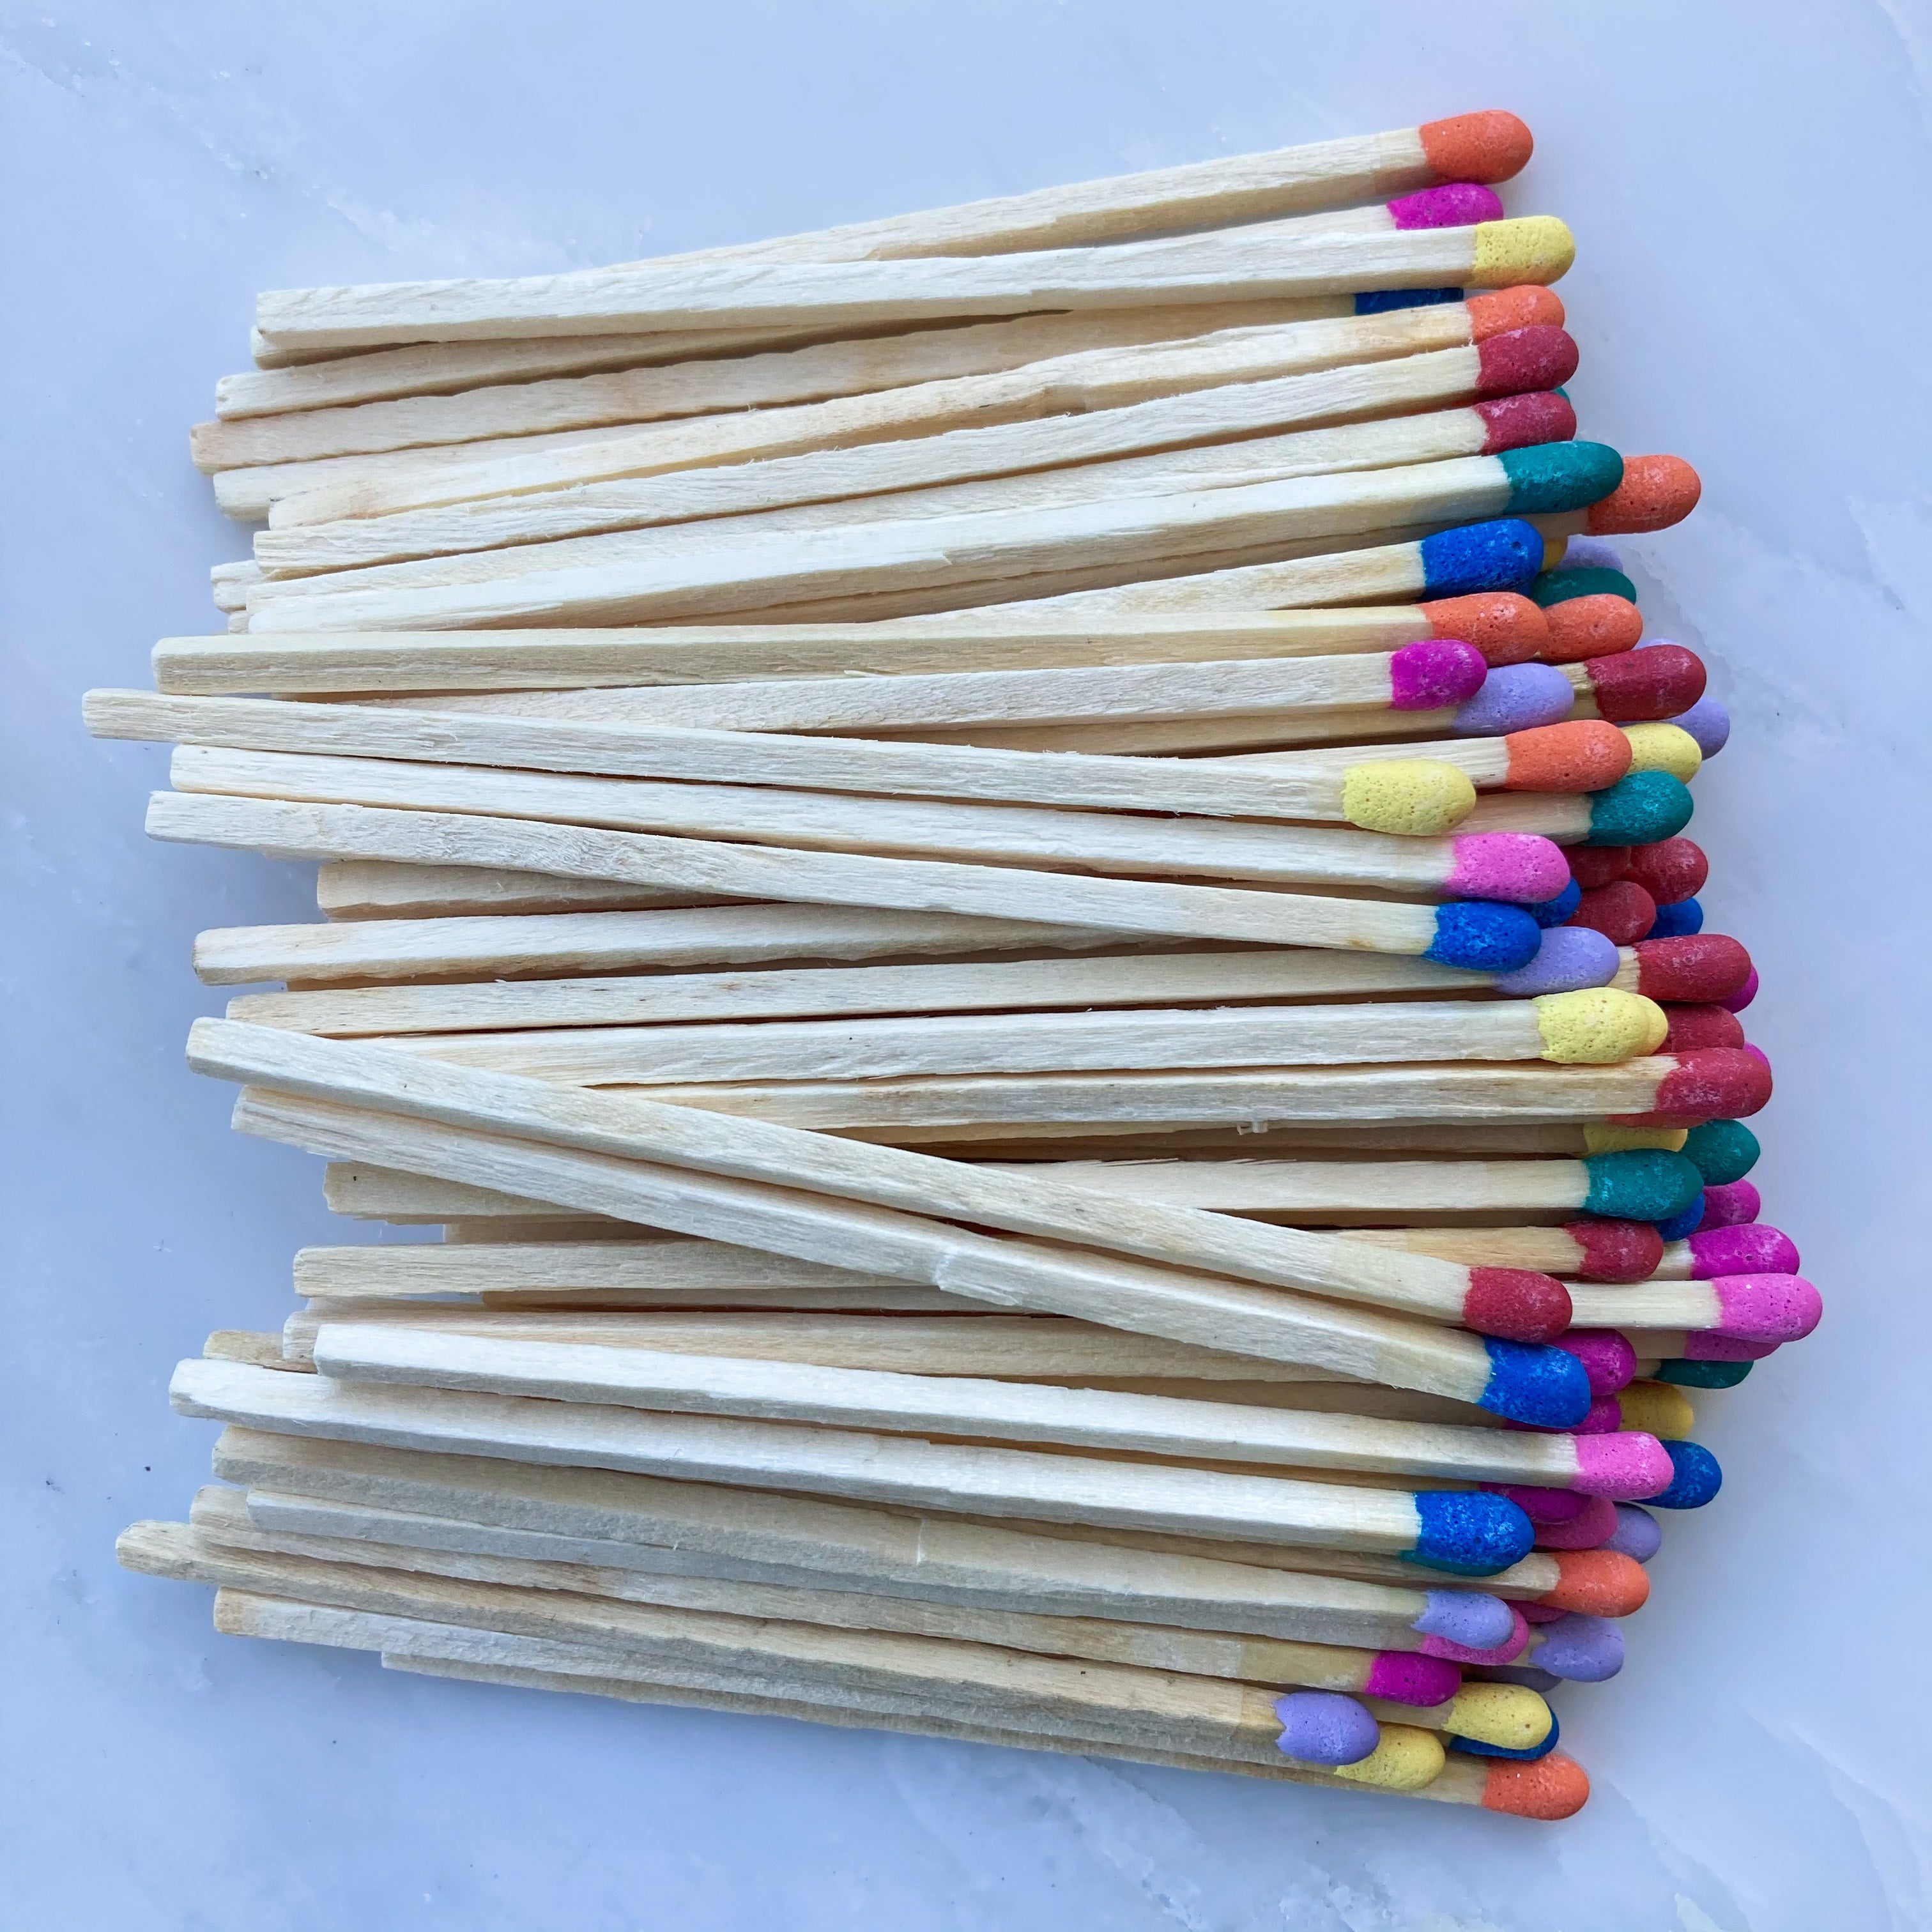 Banter & Bliss Candle Co. 3.5" Matchstick Bottle Refill Matches with Rainbow Tips Bundle of 100 Matchsticks